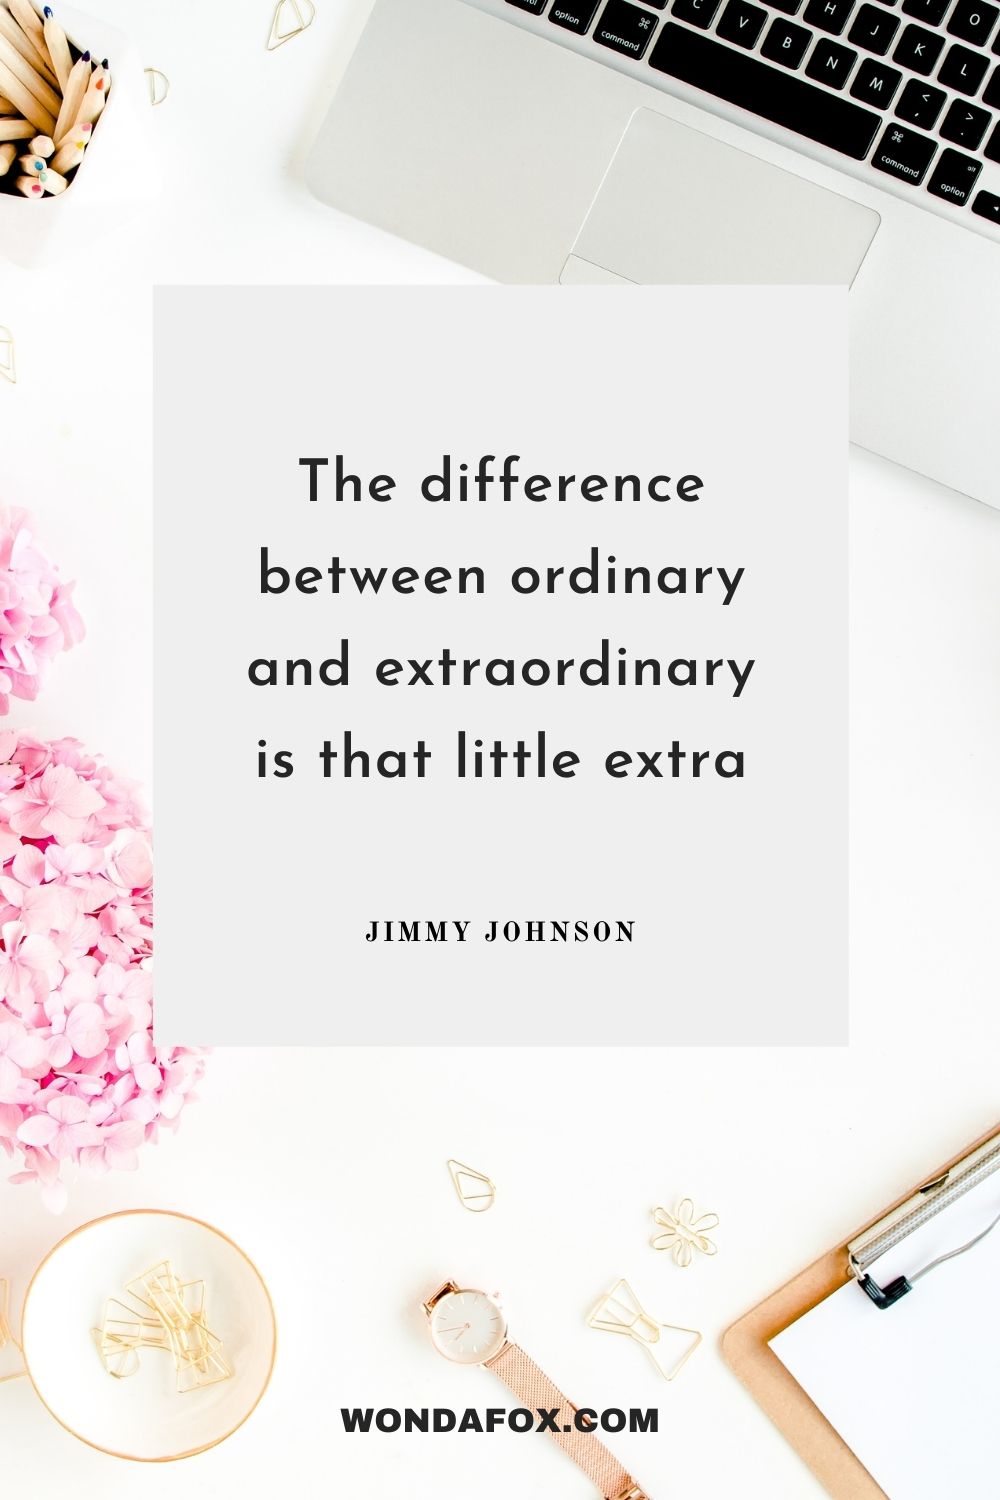 The difference between ordinary and extraordinary is that little extra